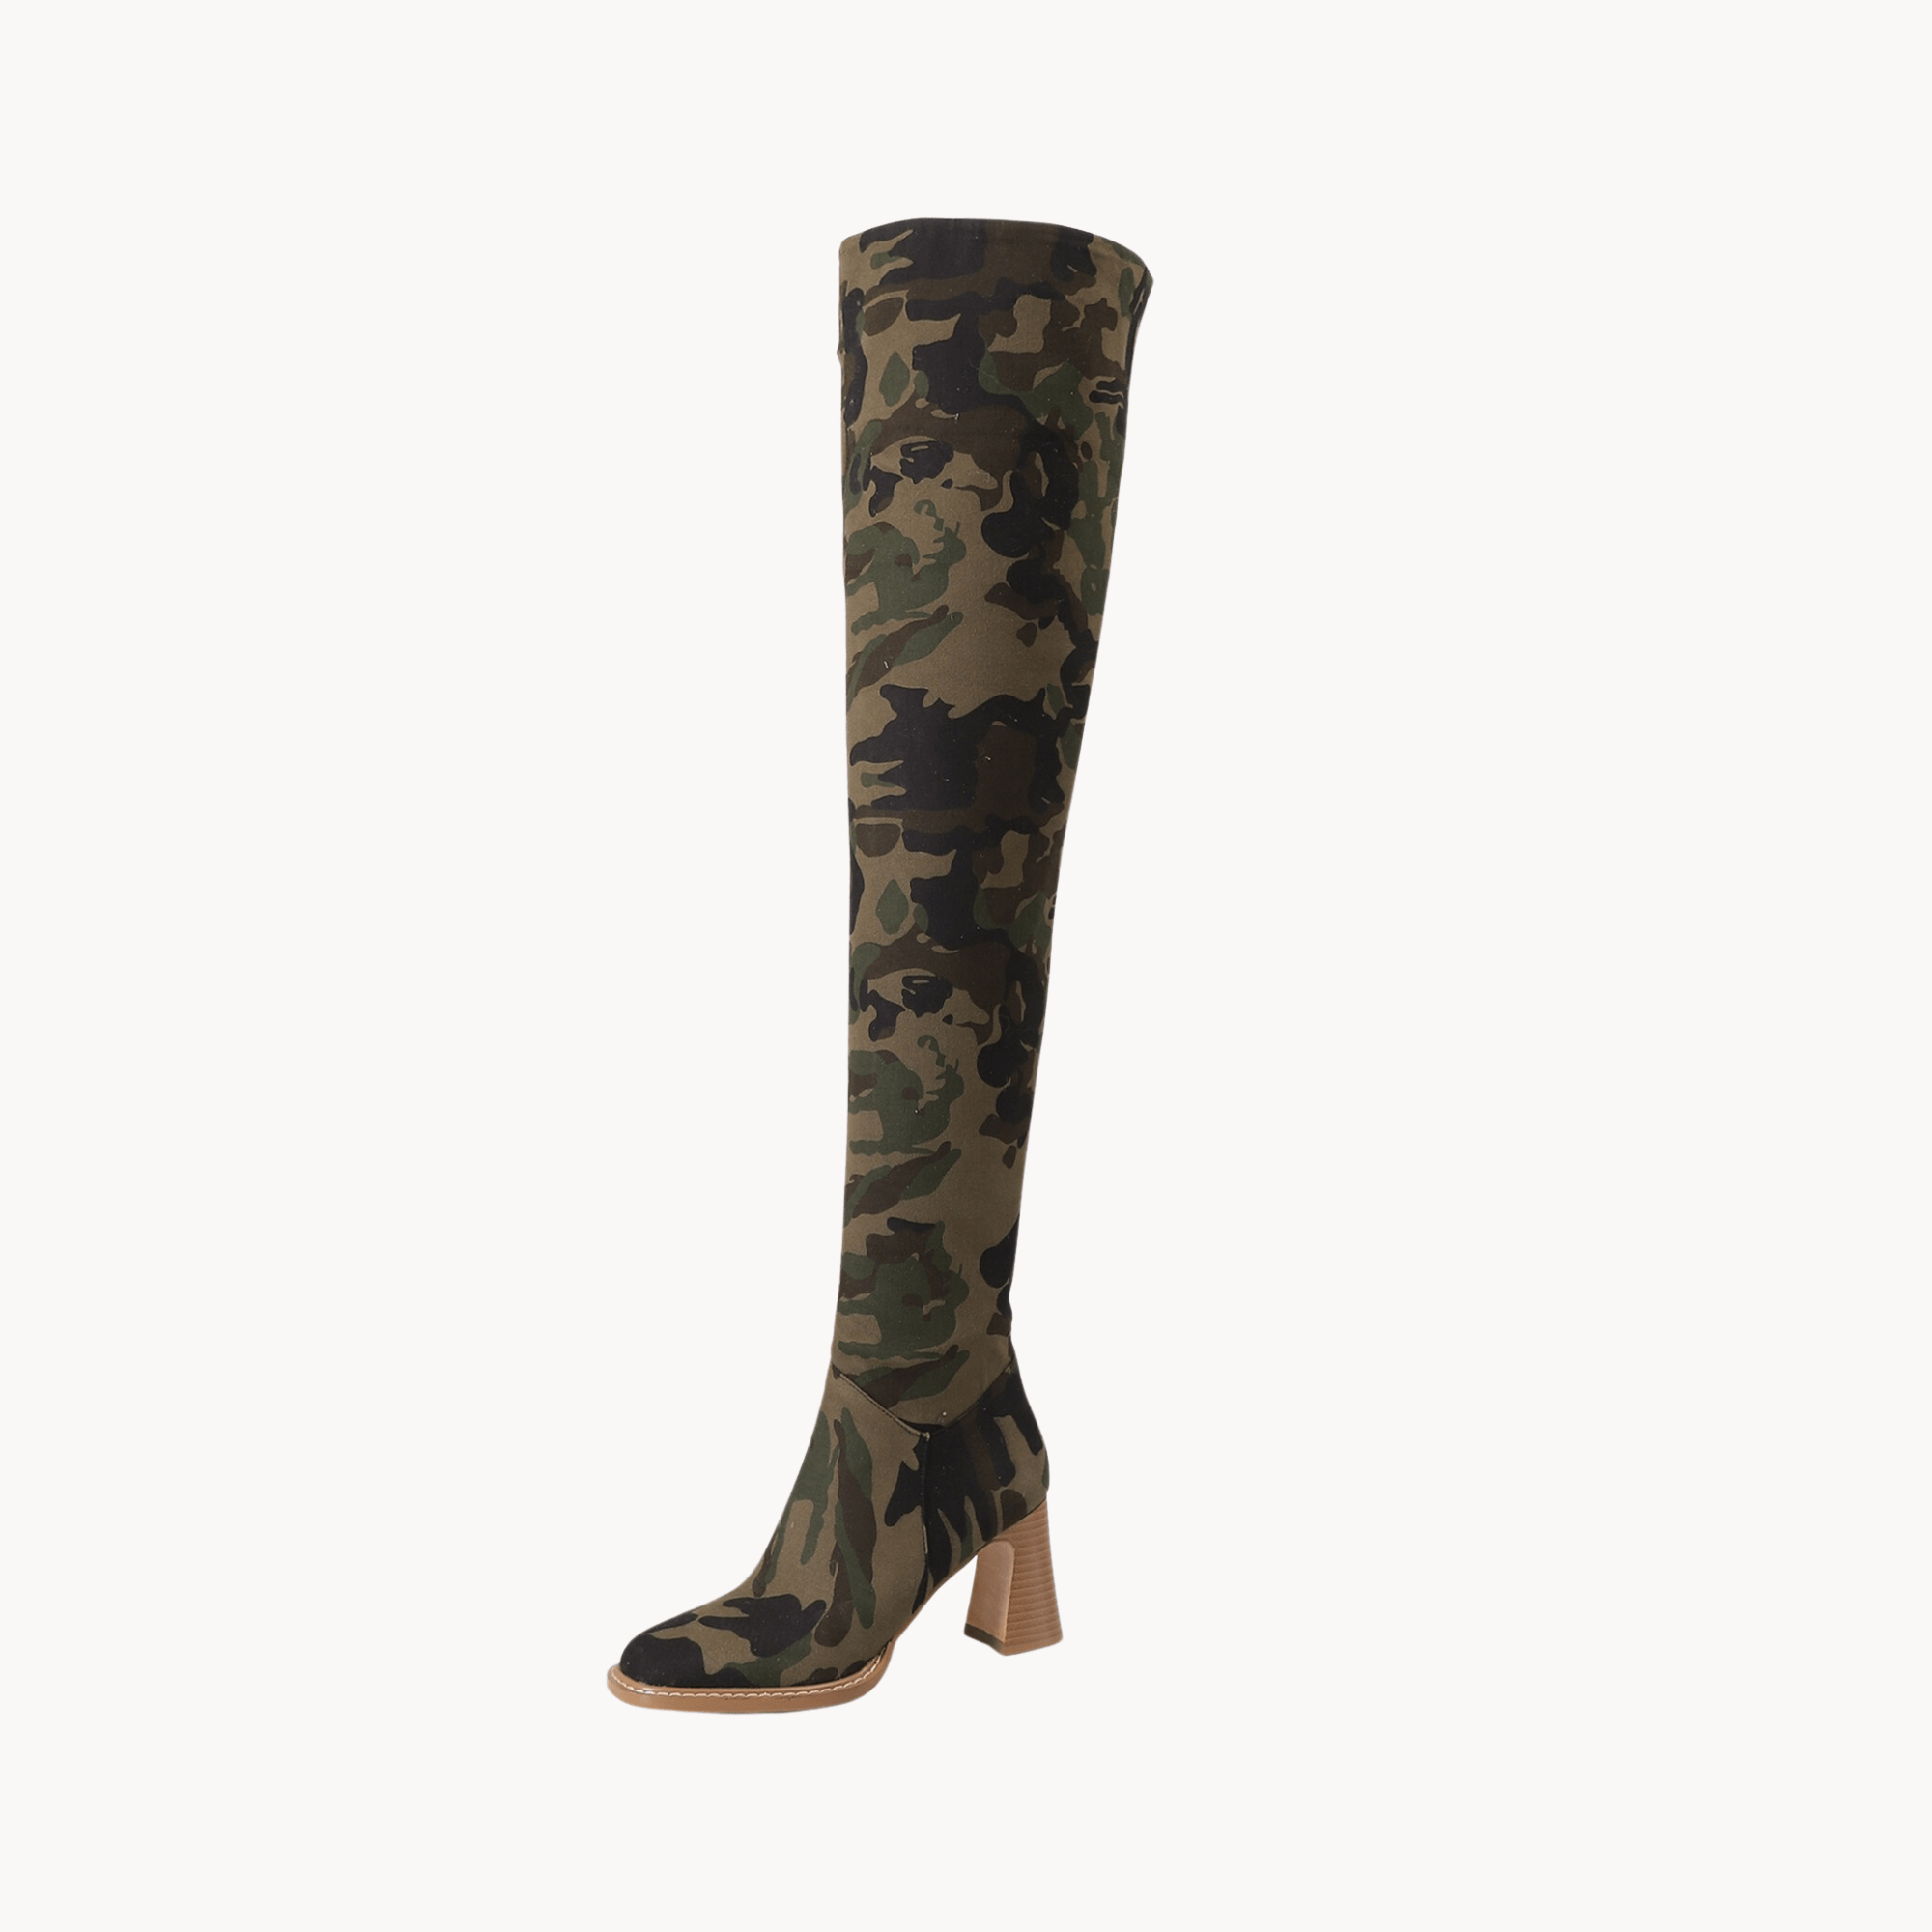 Camouflage Thigh High Boots - Kelly Obi New York